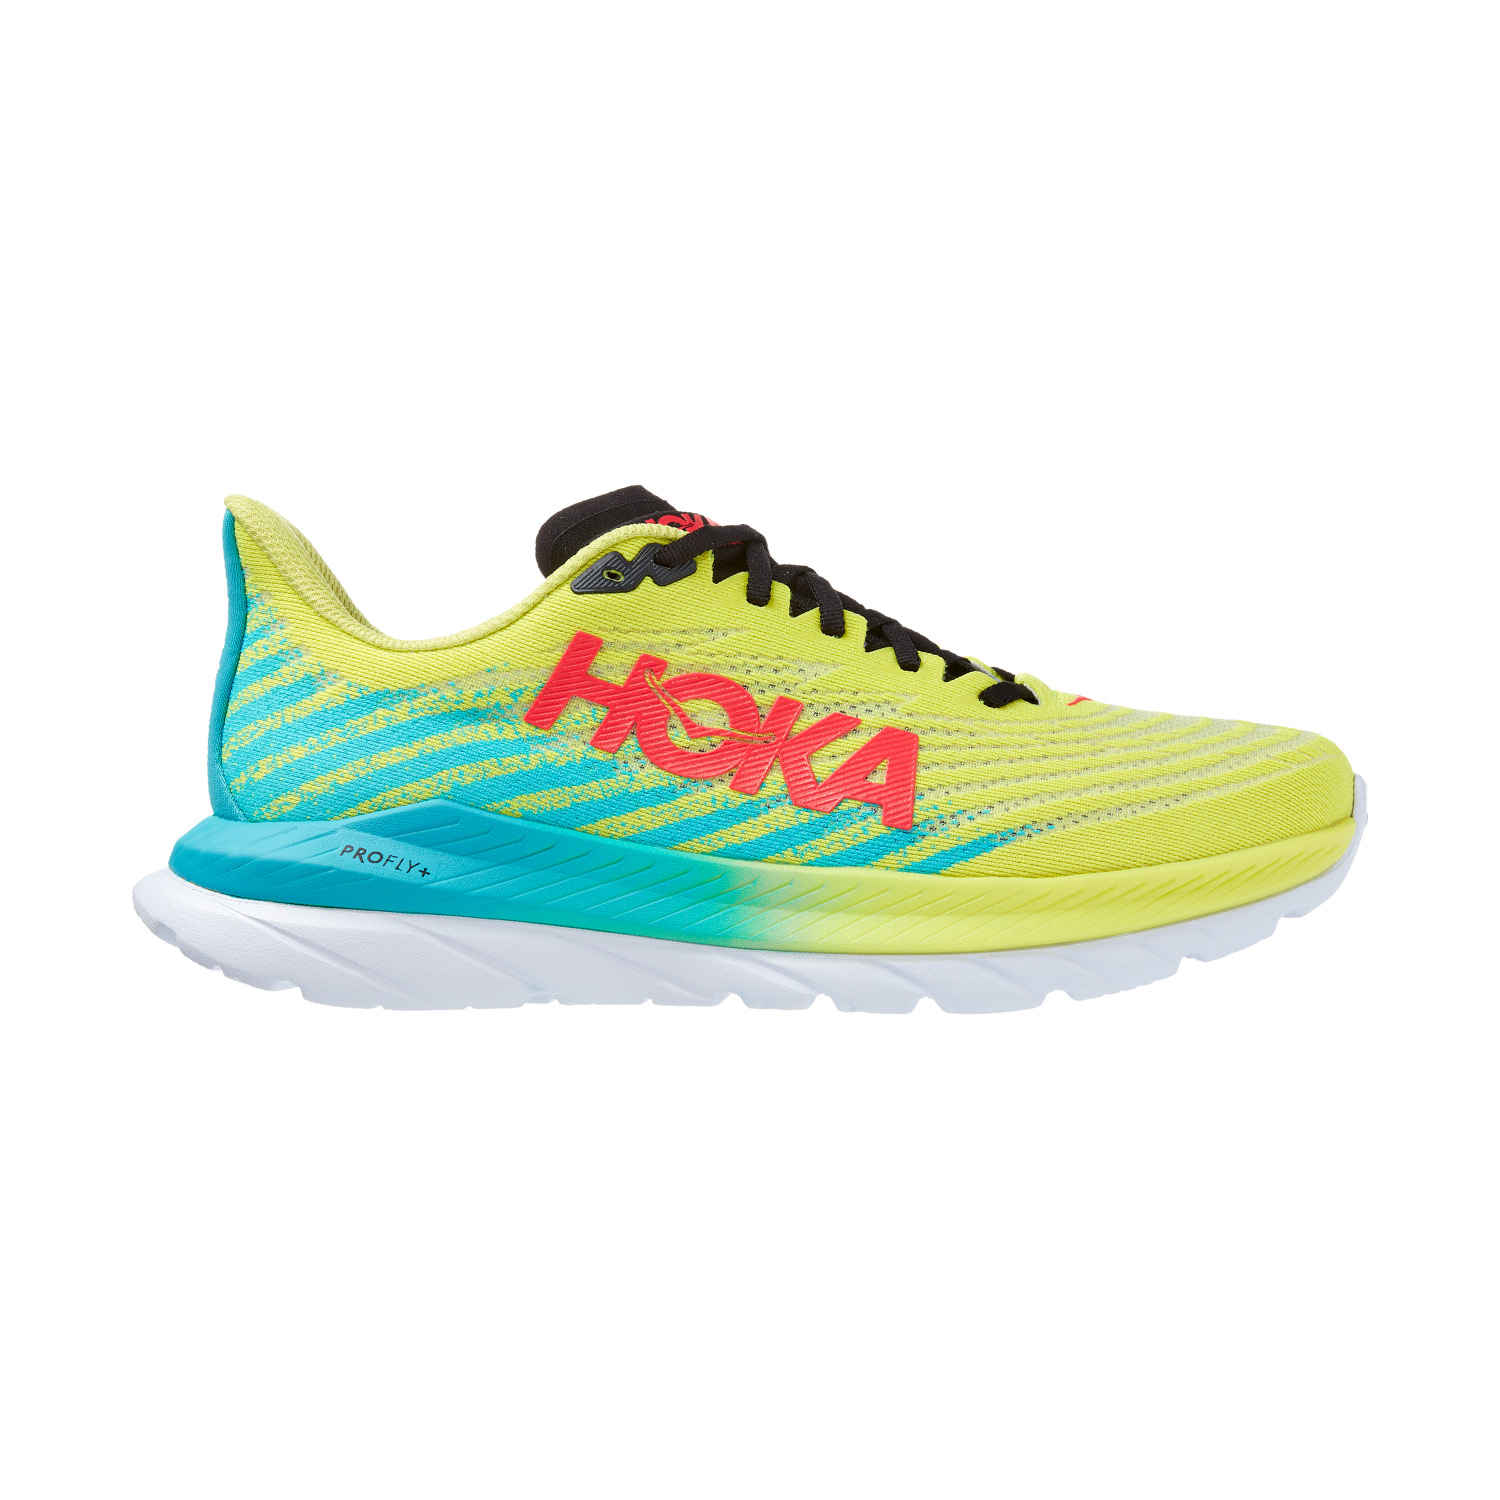 Outletshoks.com Review: Exposing the HOKA Summer Clearance Scam